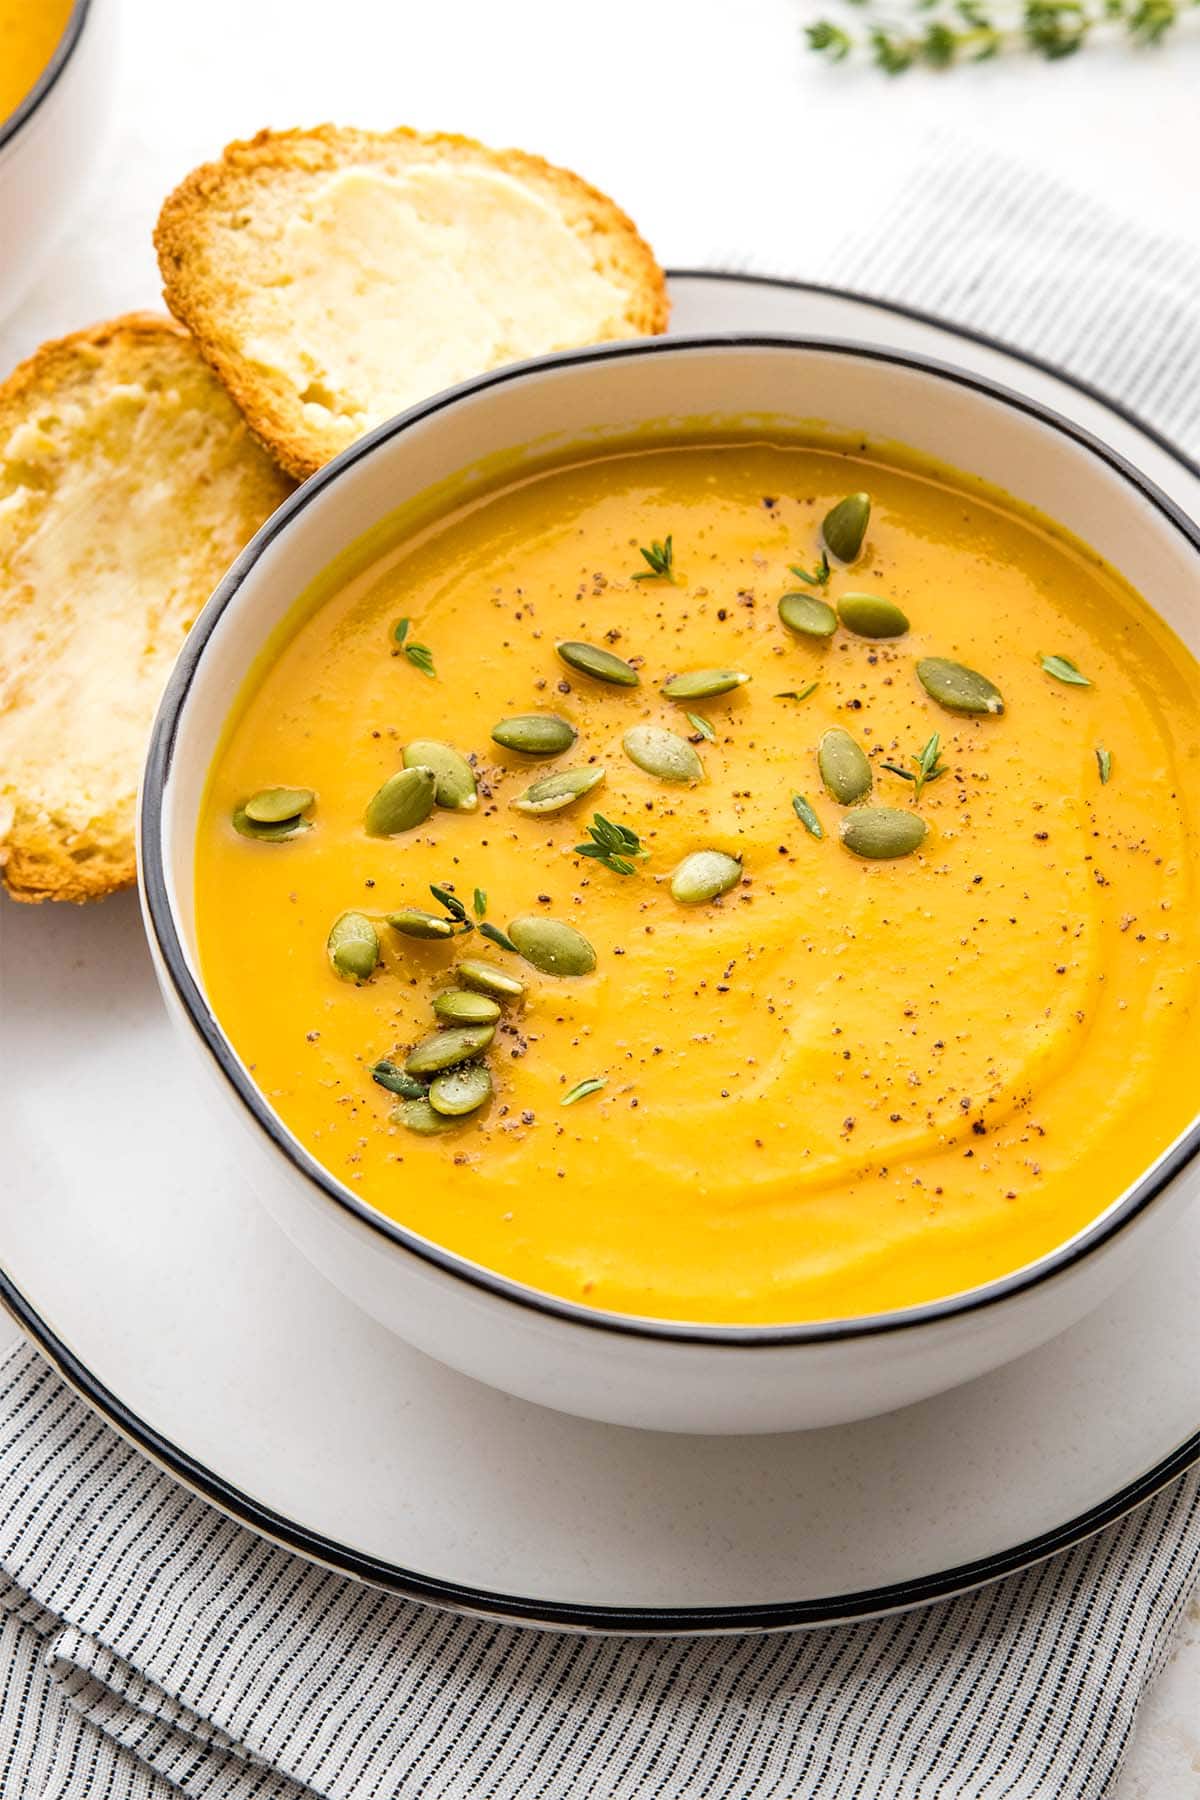 Butternut squash soup in a white bowl with a black rim, garnished with pumpkin seeds, thyme and black pepper, served with two buttered baguette slices.